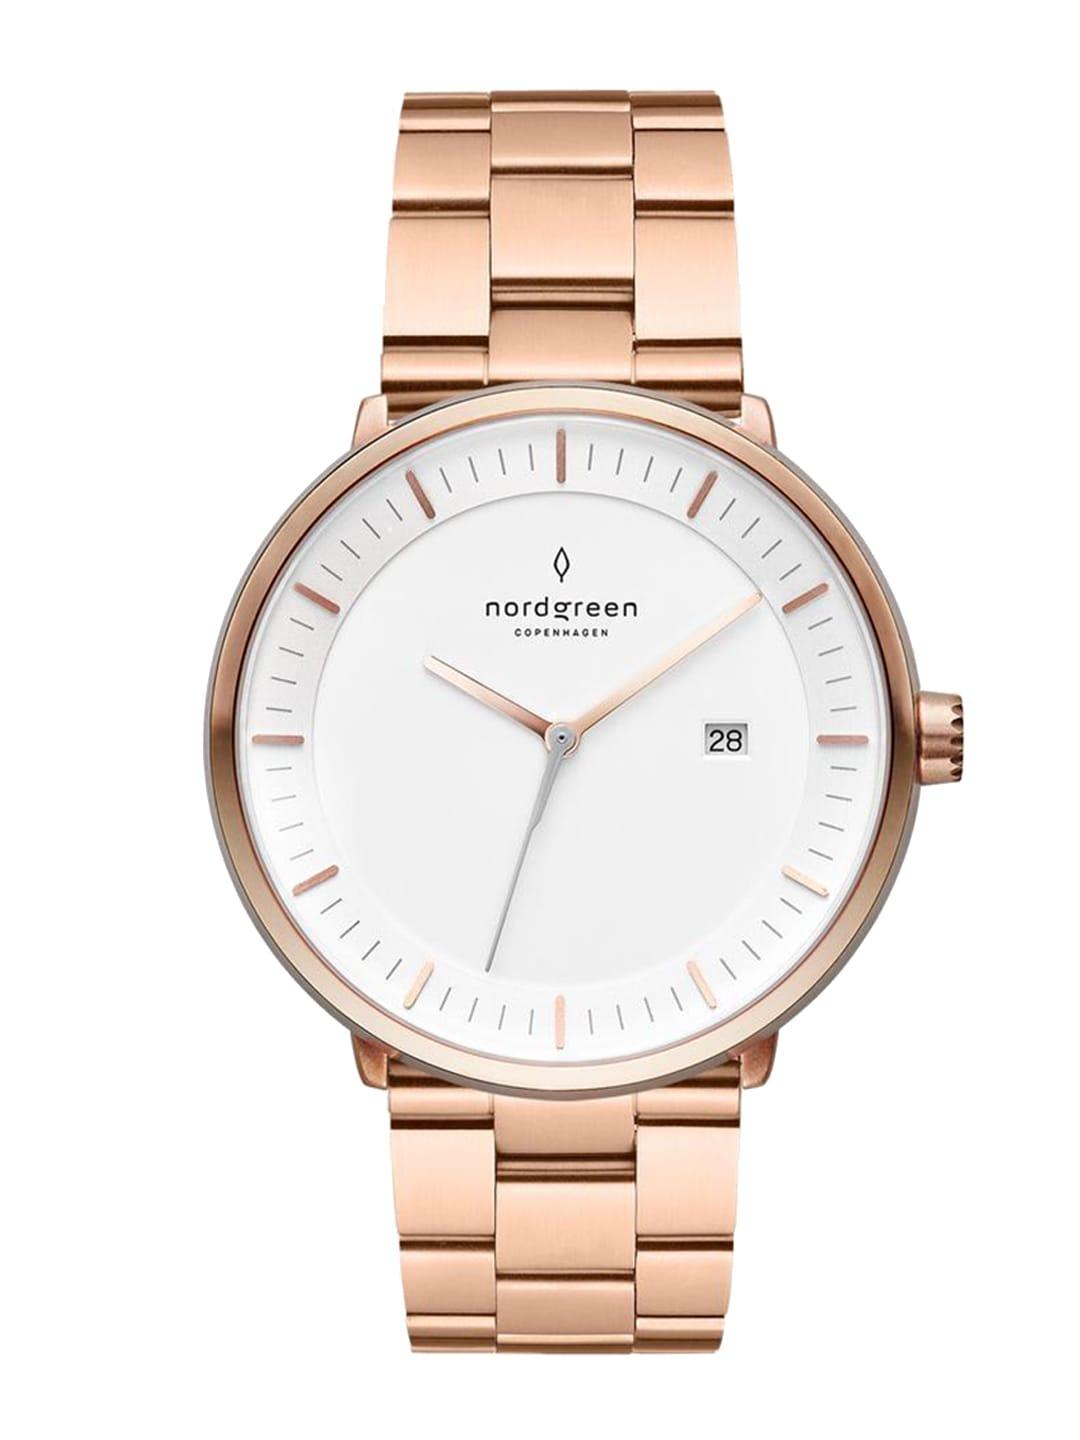 nordgreen men white dial & rose gold toned stainless steel bracelet style straps analogue watch